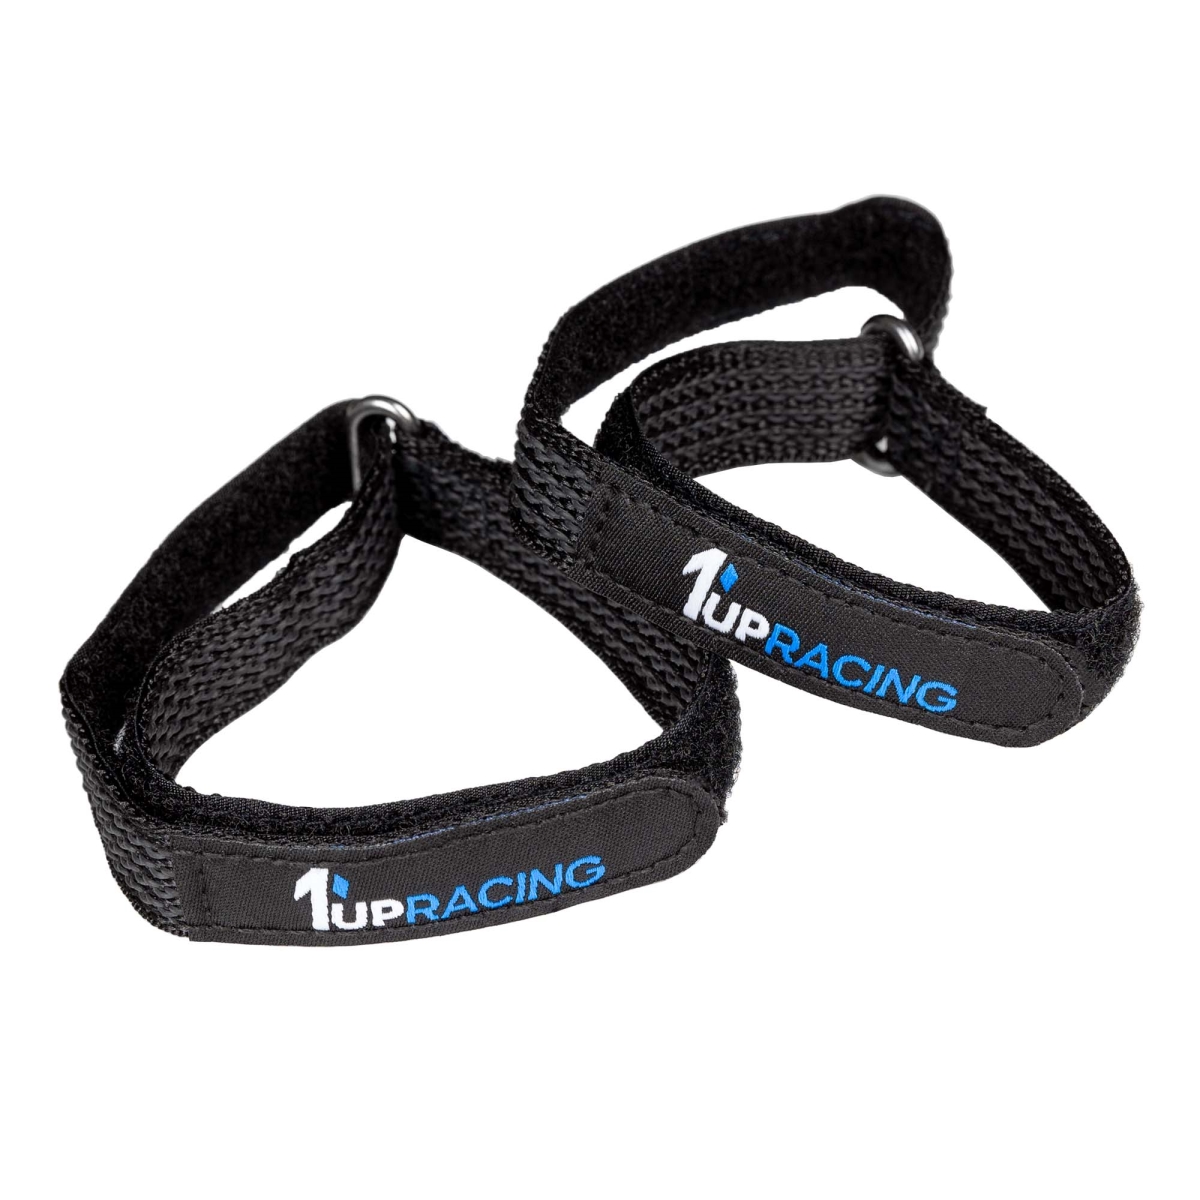 Picture of HPI Racing 1UP10205 Lockdown Tire Straps, 2 Piece